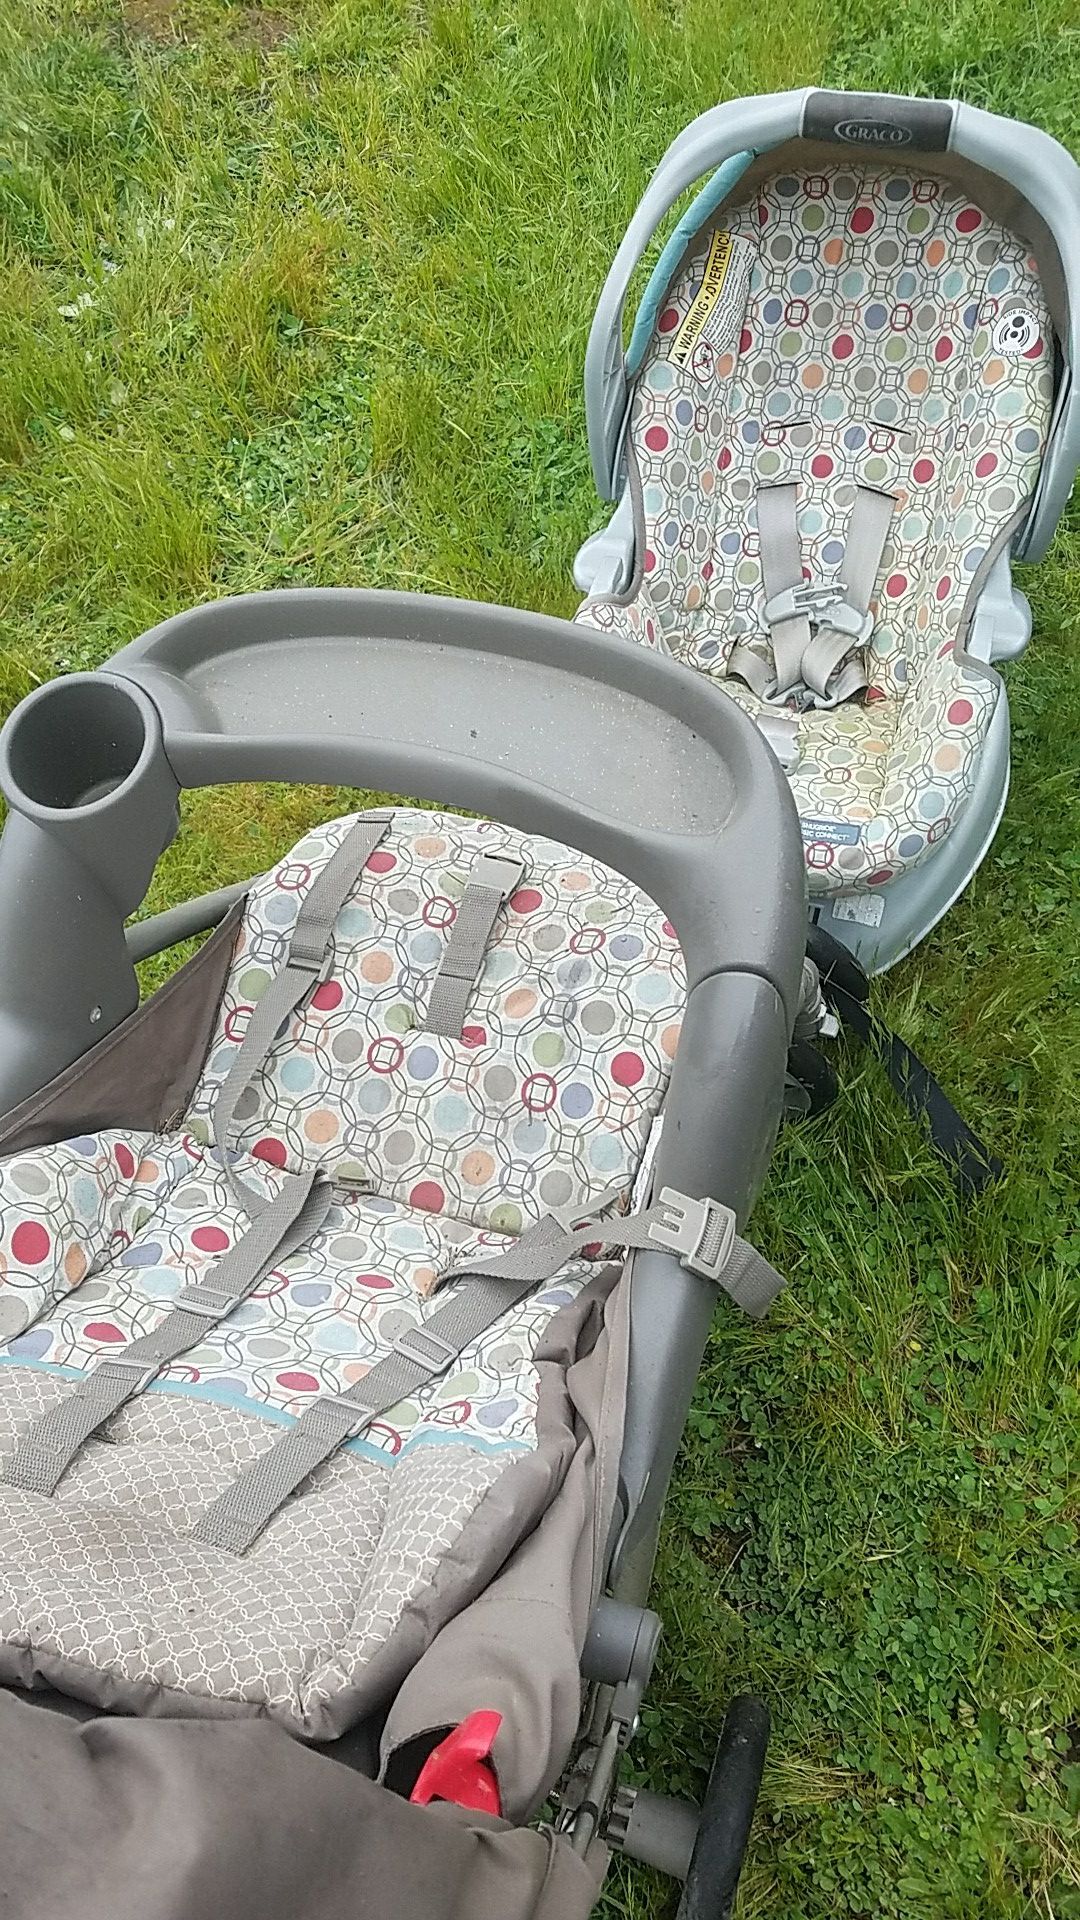 Graco stroller and carseat retails for 160